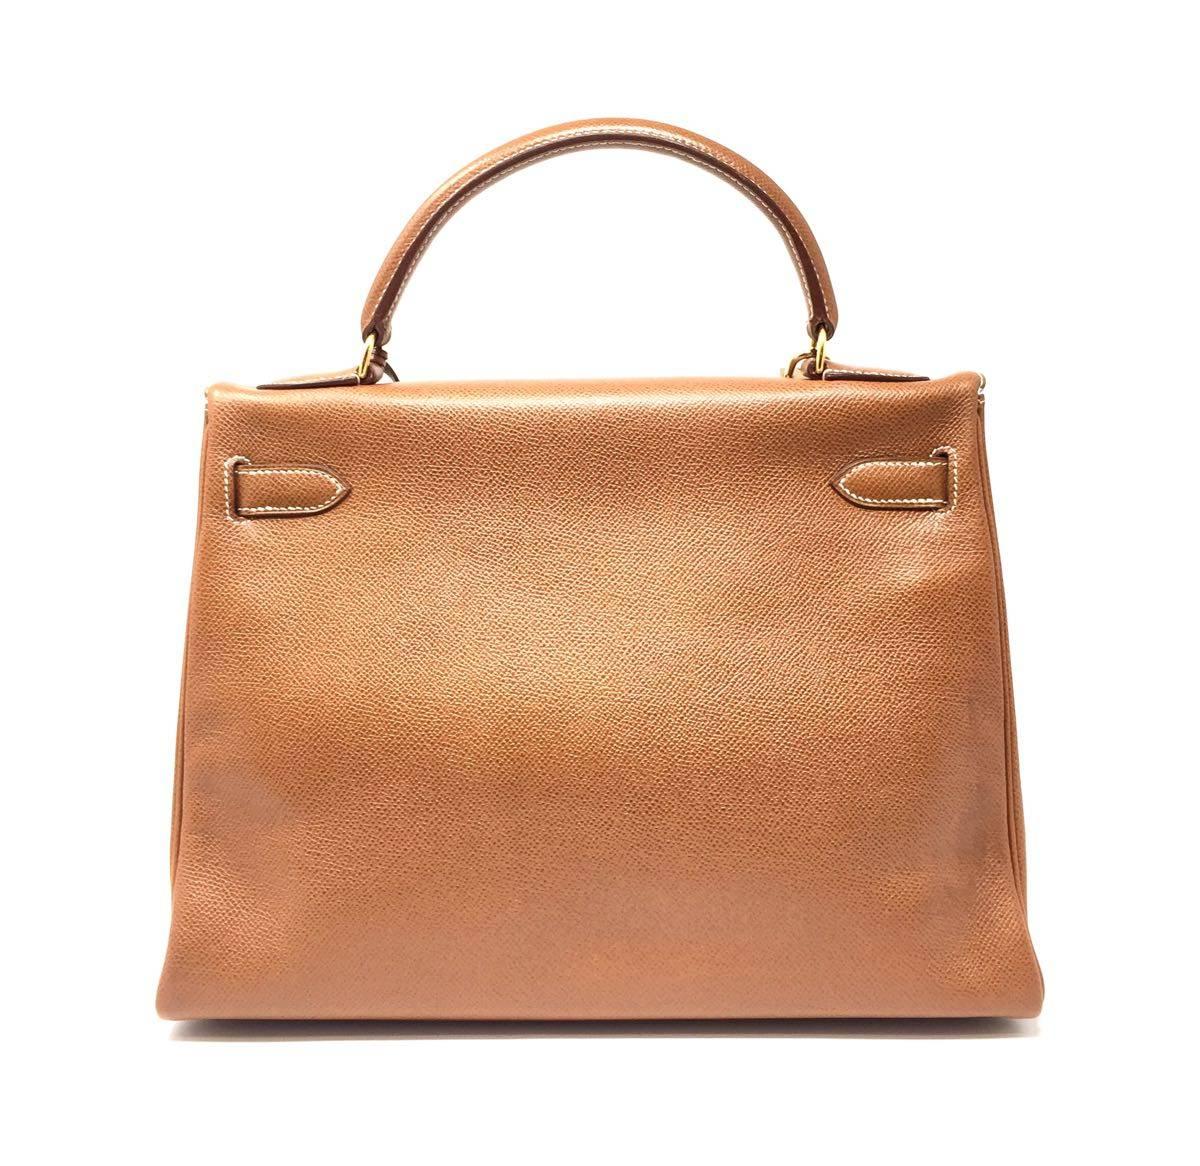 Brown 1992, HERMES Vintage  Sac Kelly 32 bag in Courchevel Gold Leather. 